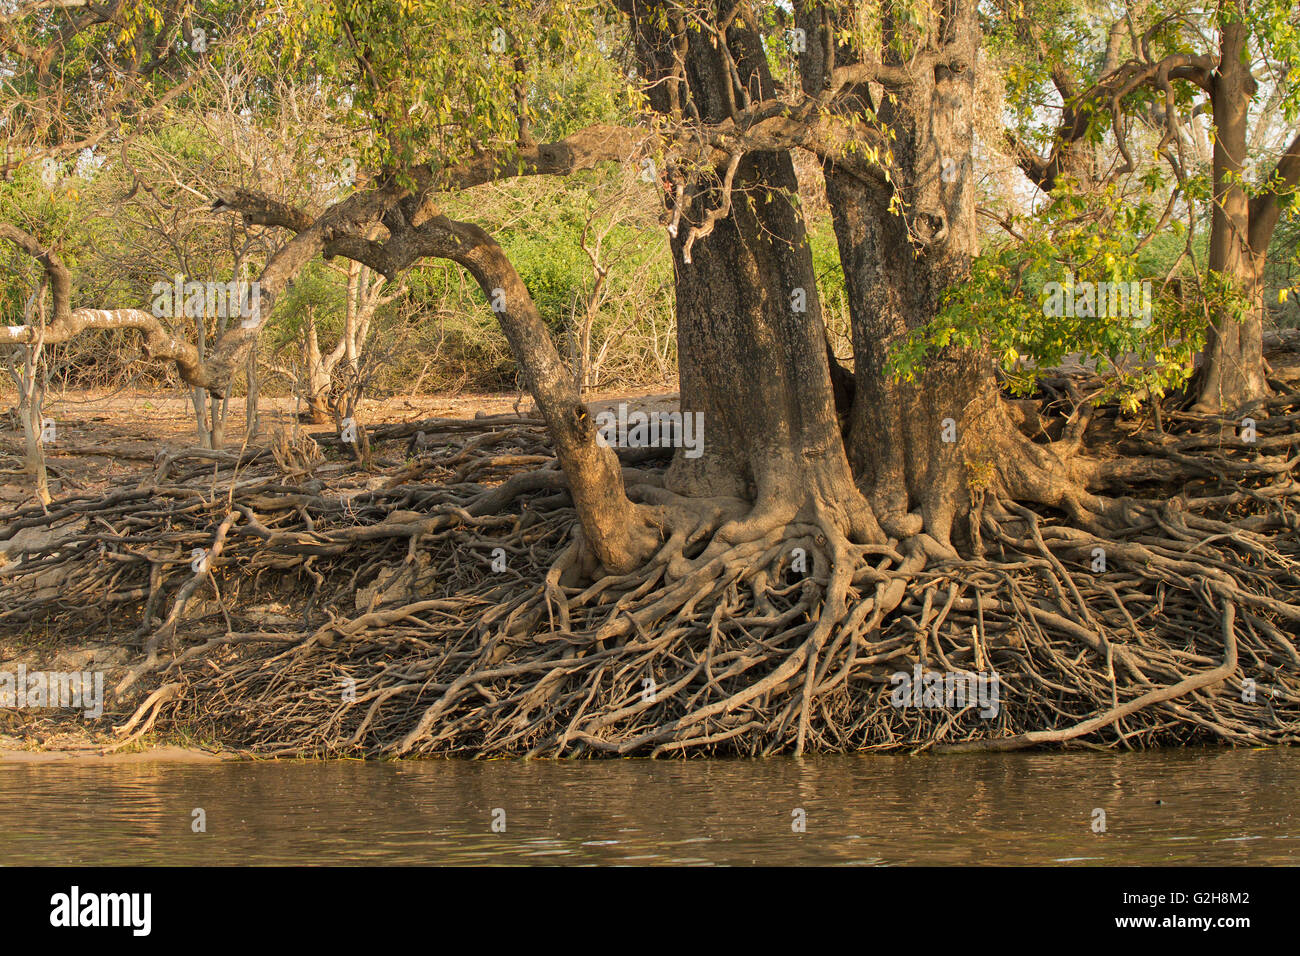 Common Wild Fig tree with aerial root structure along the Chobe River in Chobe National Park, Botswana, Africa Stock Photo